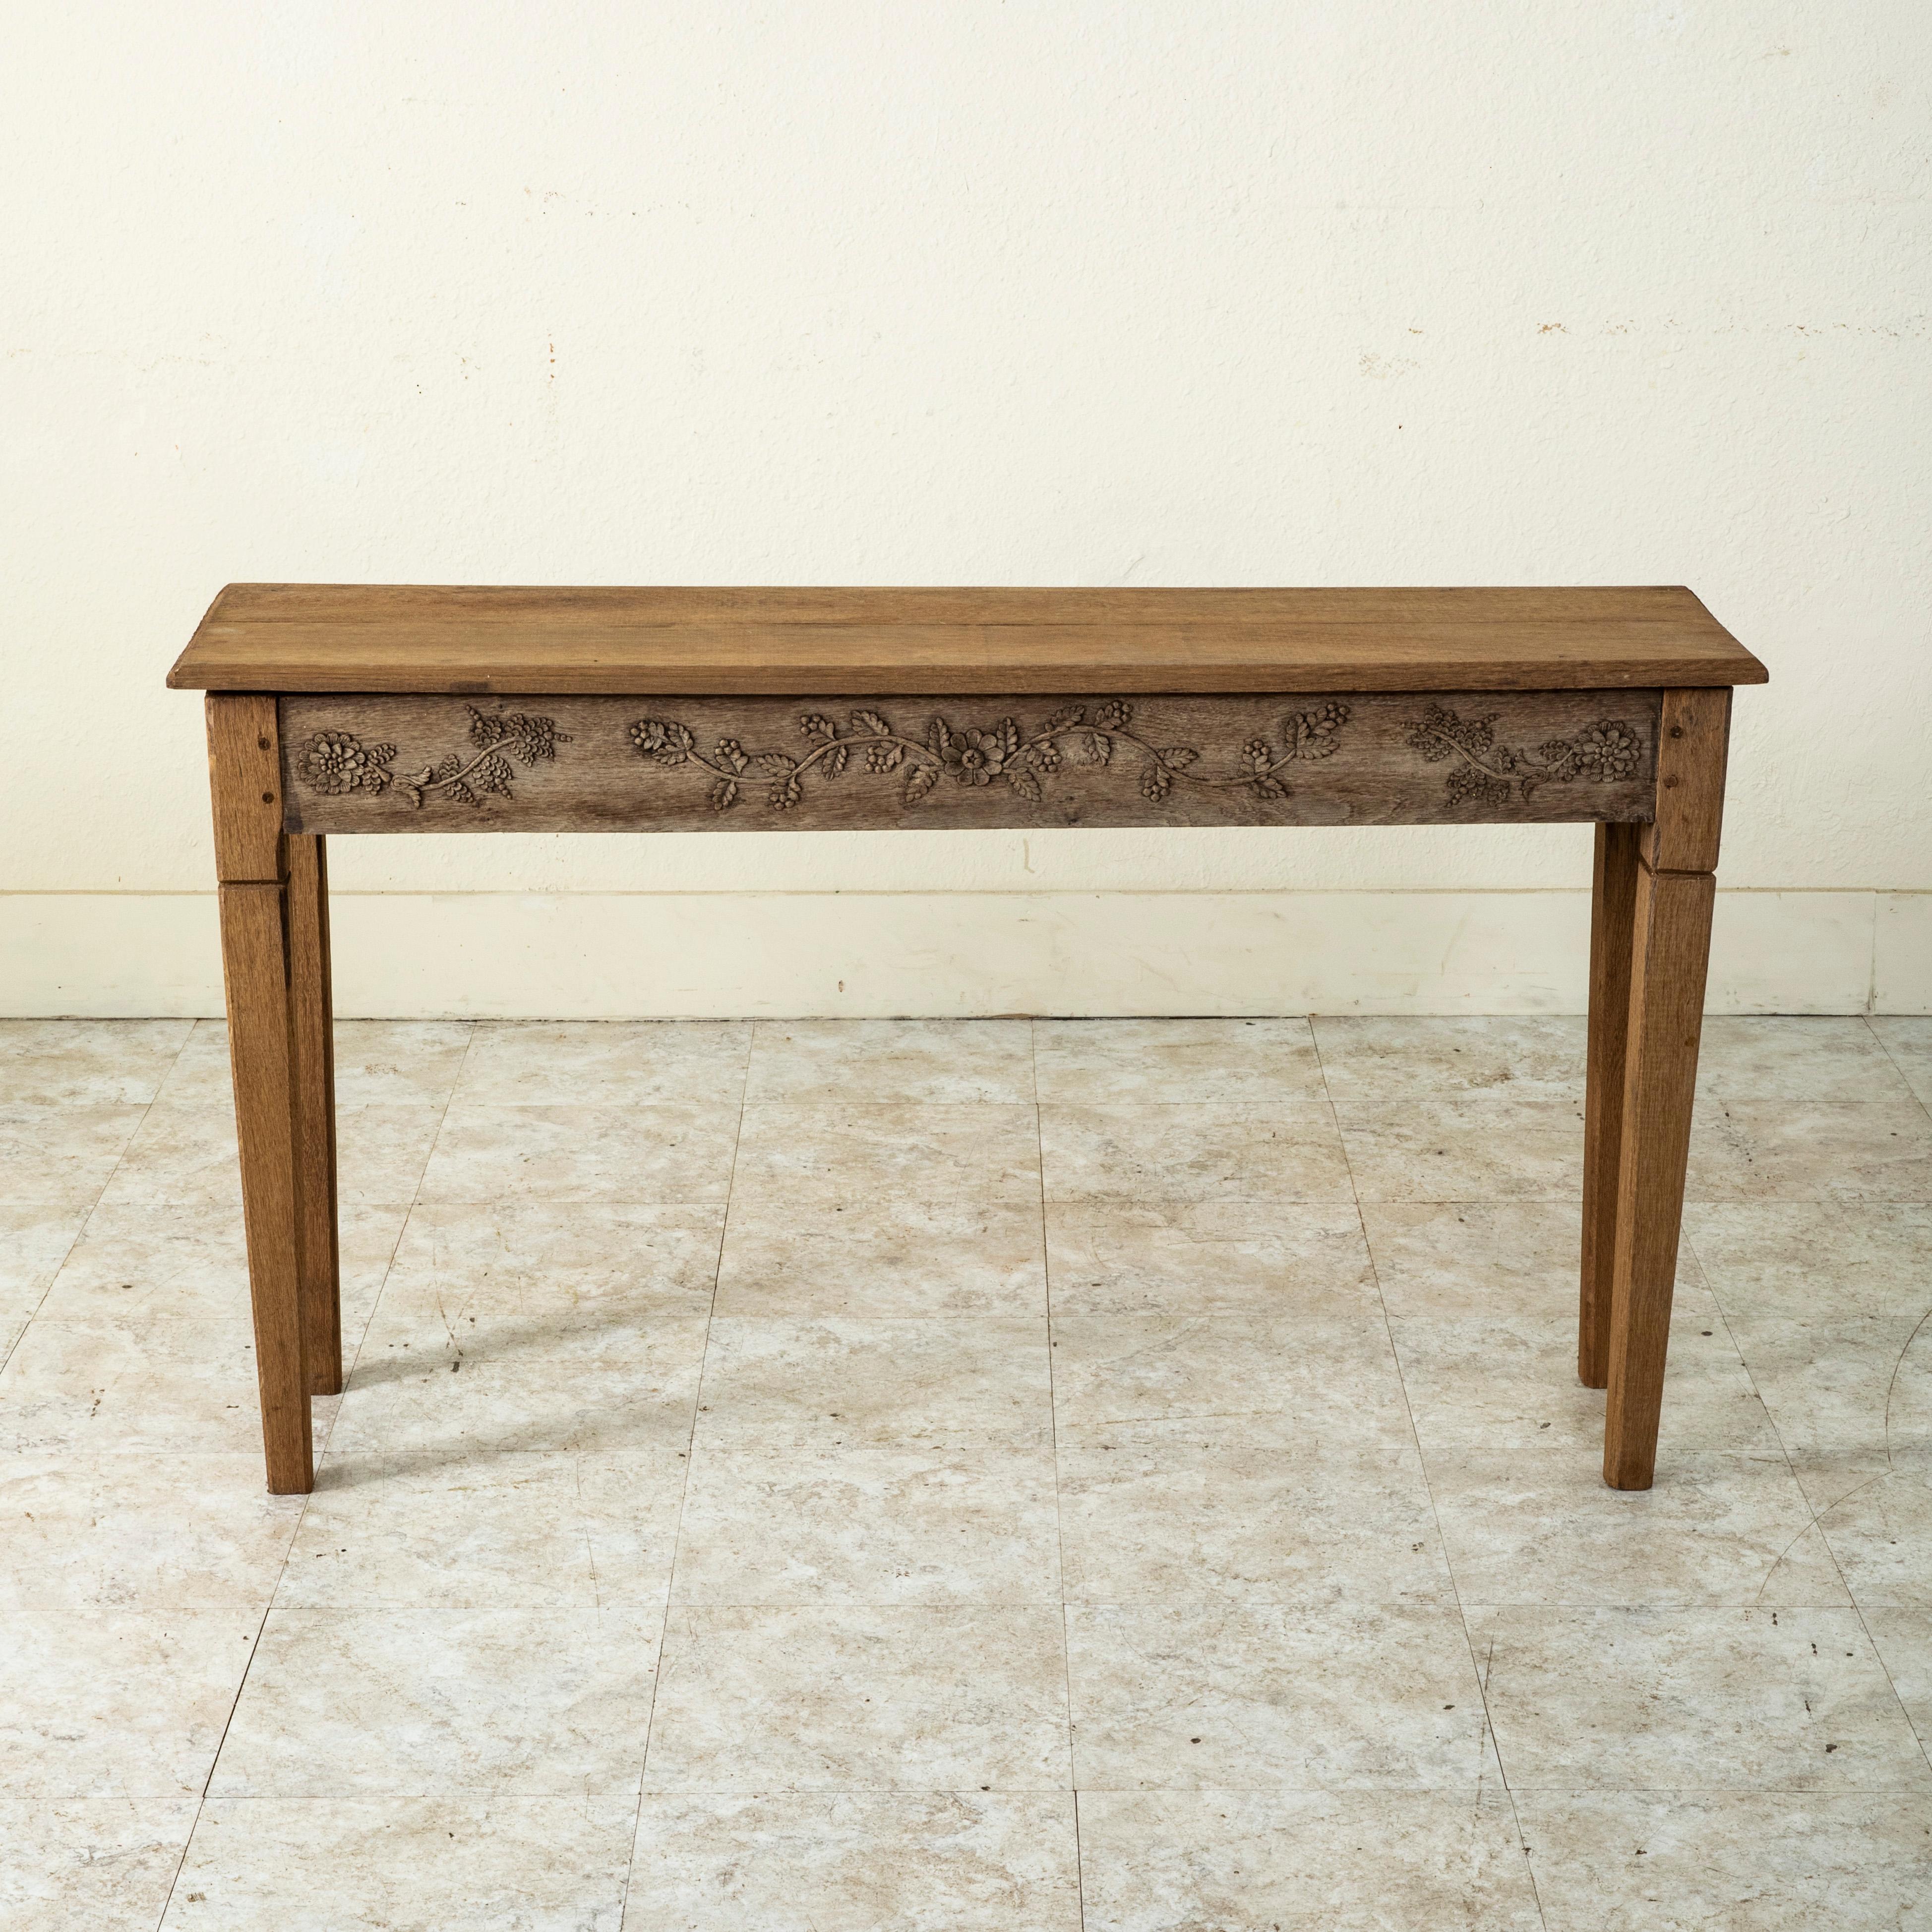 This late nineteenth century French bleached oak console table or sofa table features a hand carved frieze of flowers on the facade. The beveled top rests on a hand pegged base with tapered square legs. c. 1890.   